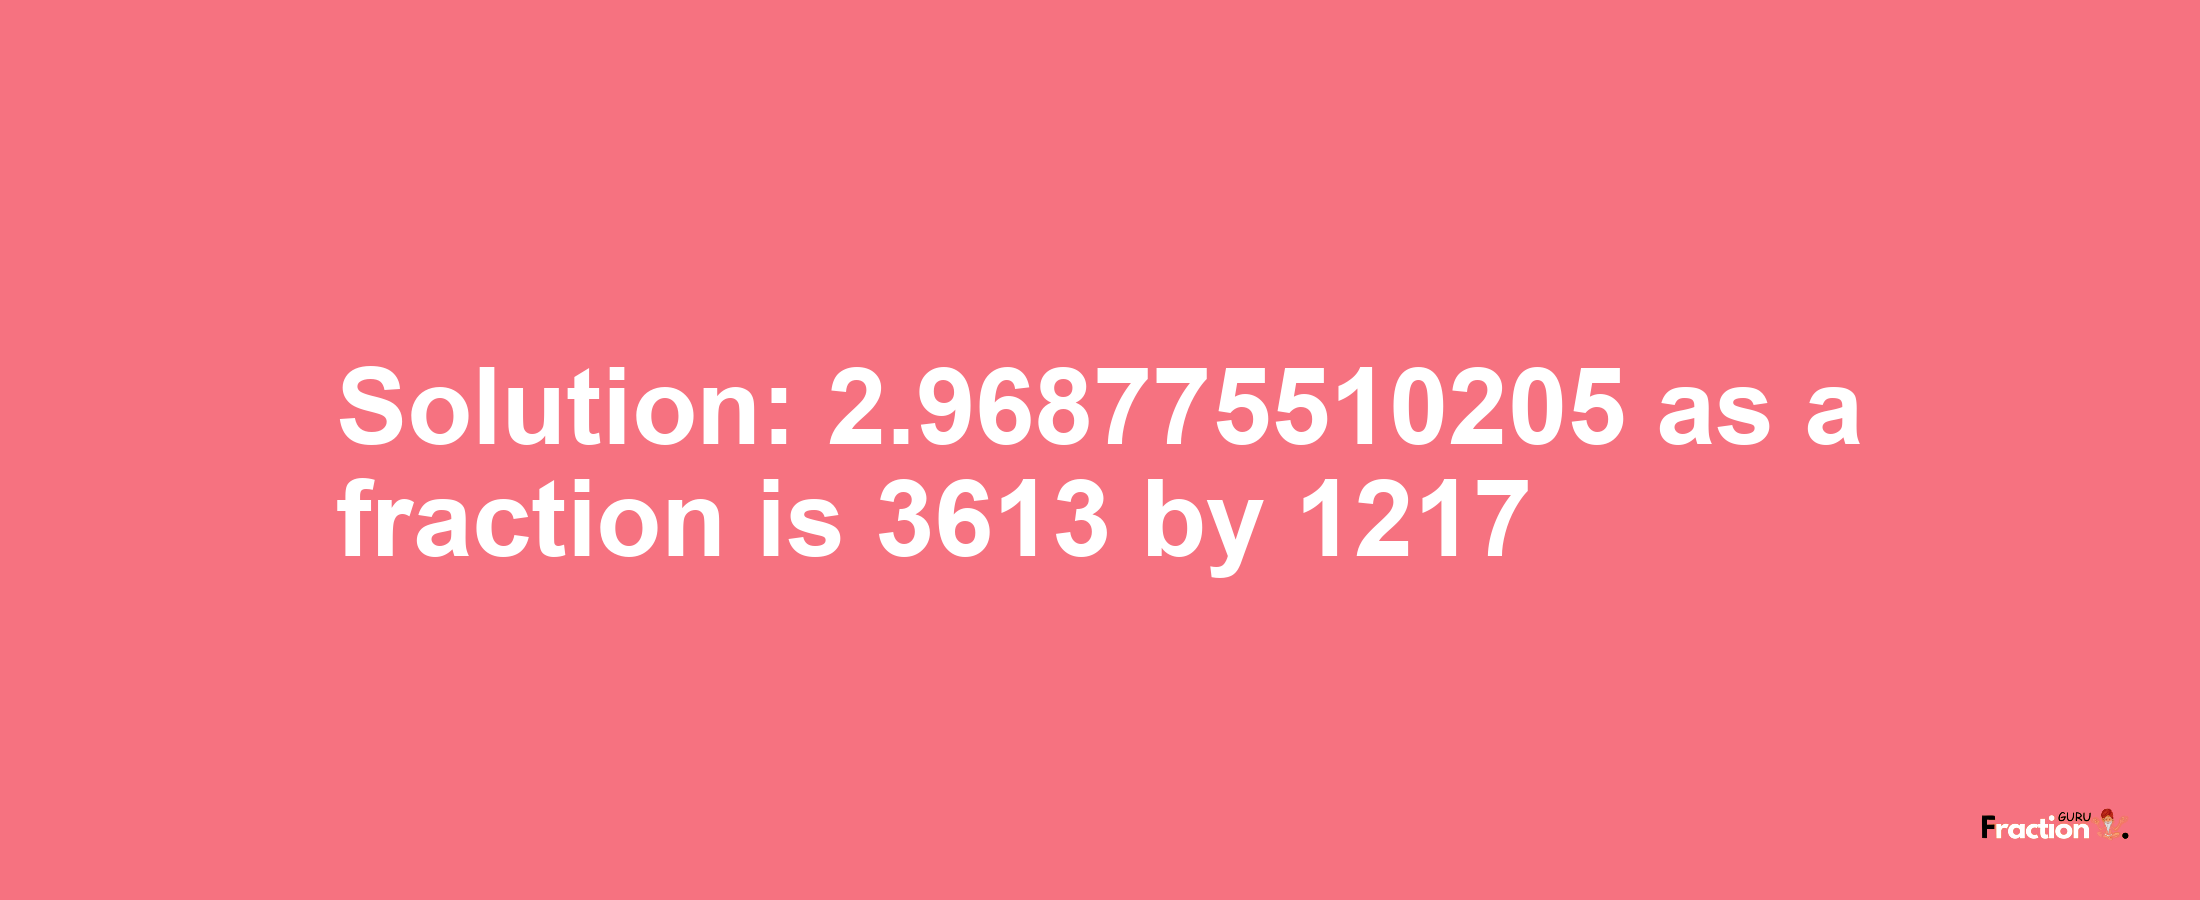 Solution:2.968775510205 as a fraction is 3613/1217